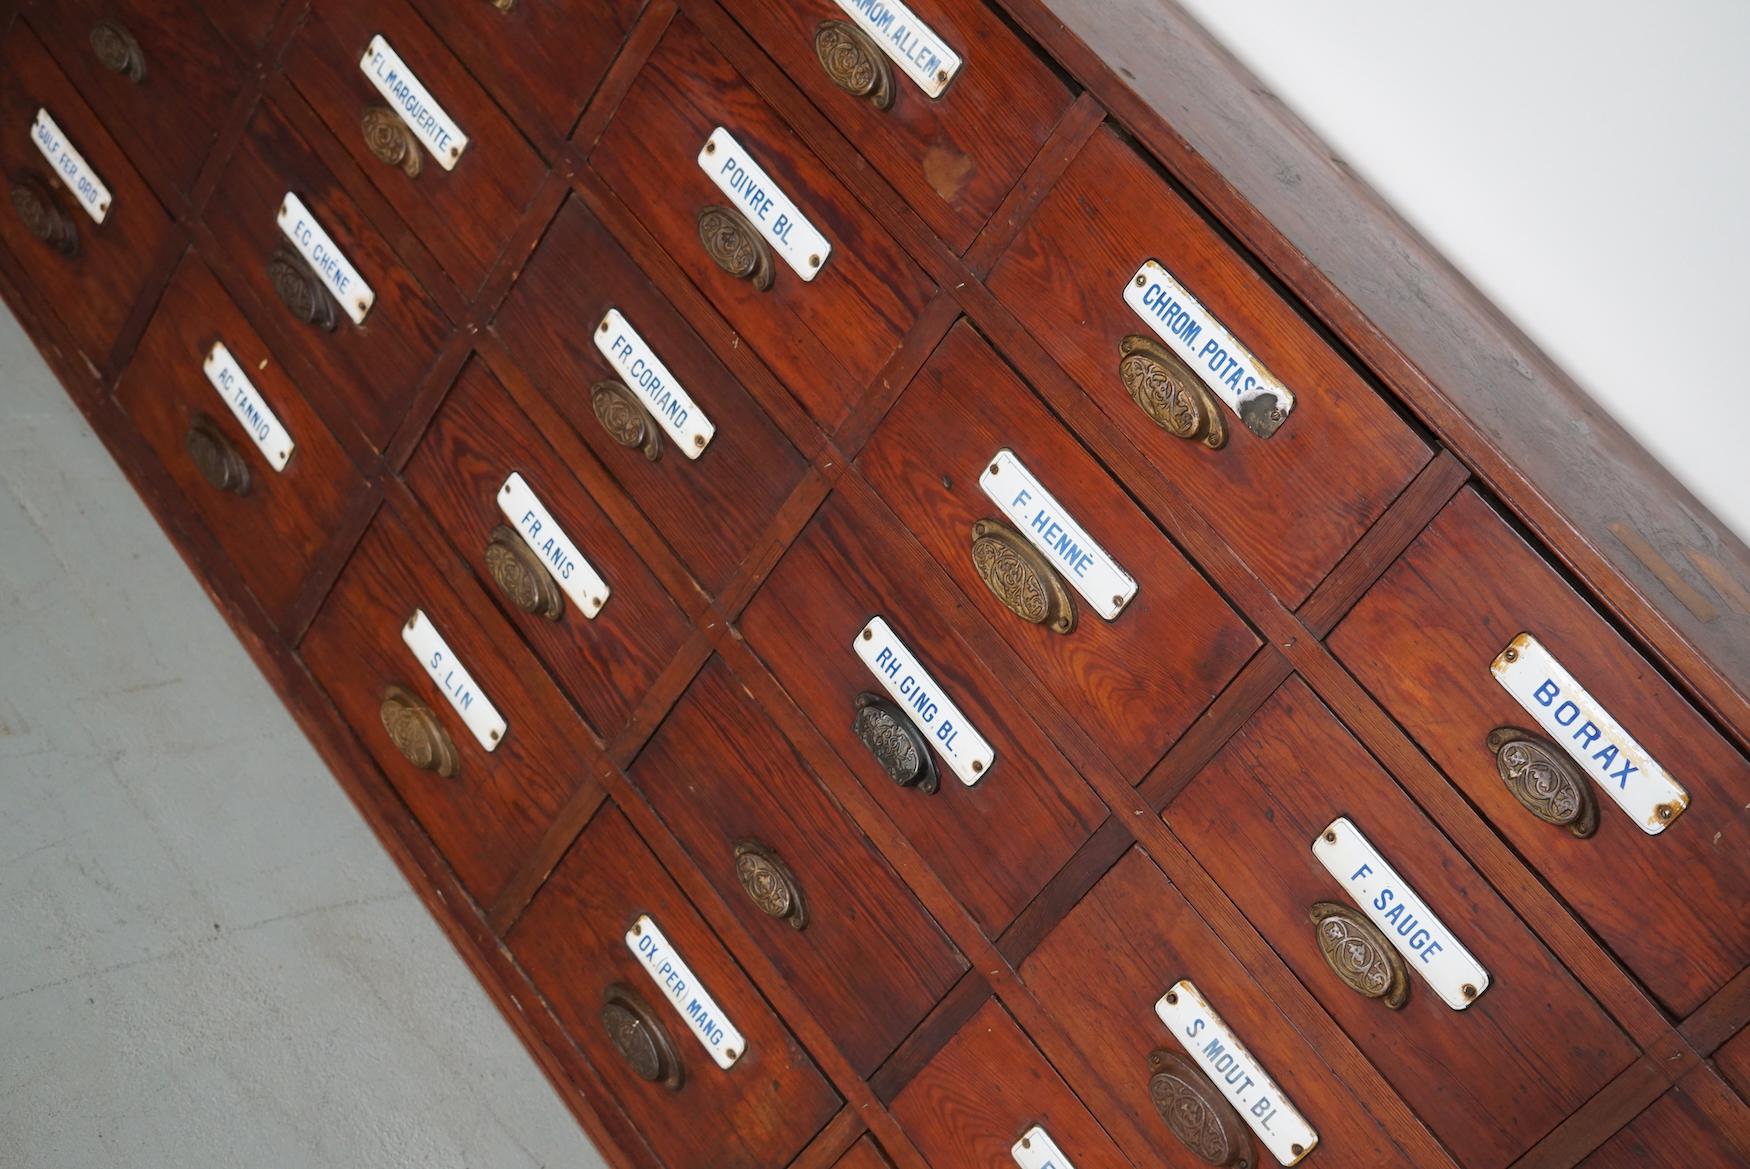  Large Antique Belgian Pitch Pine Apothecary Cabinet with Enamel Shields, 1900s For Sale 2